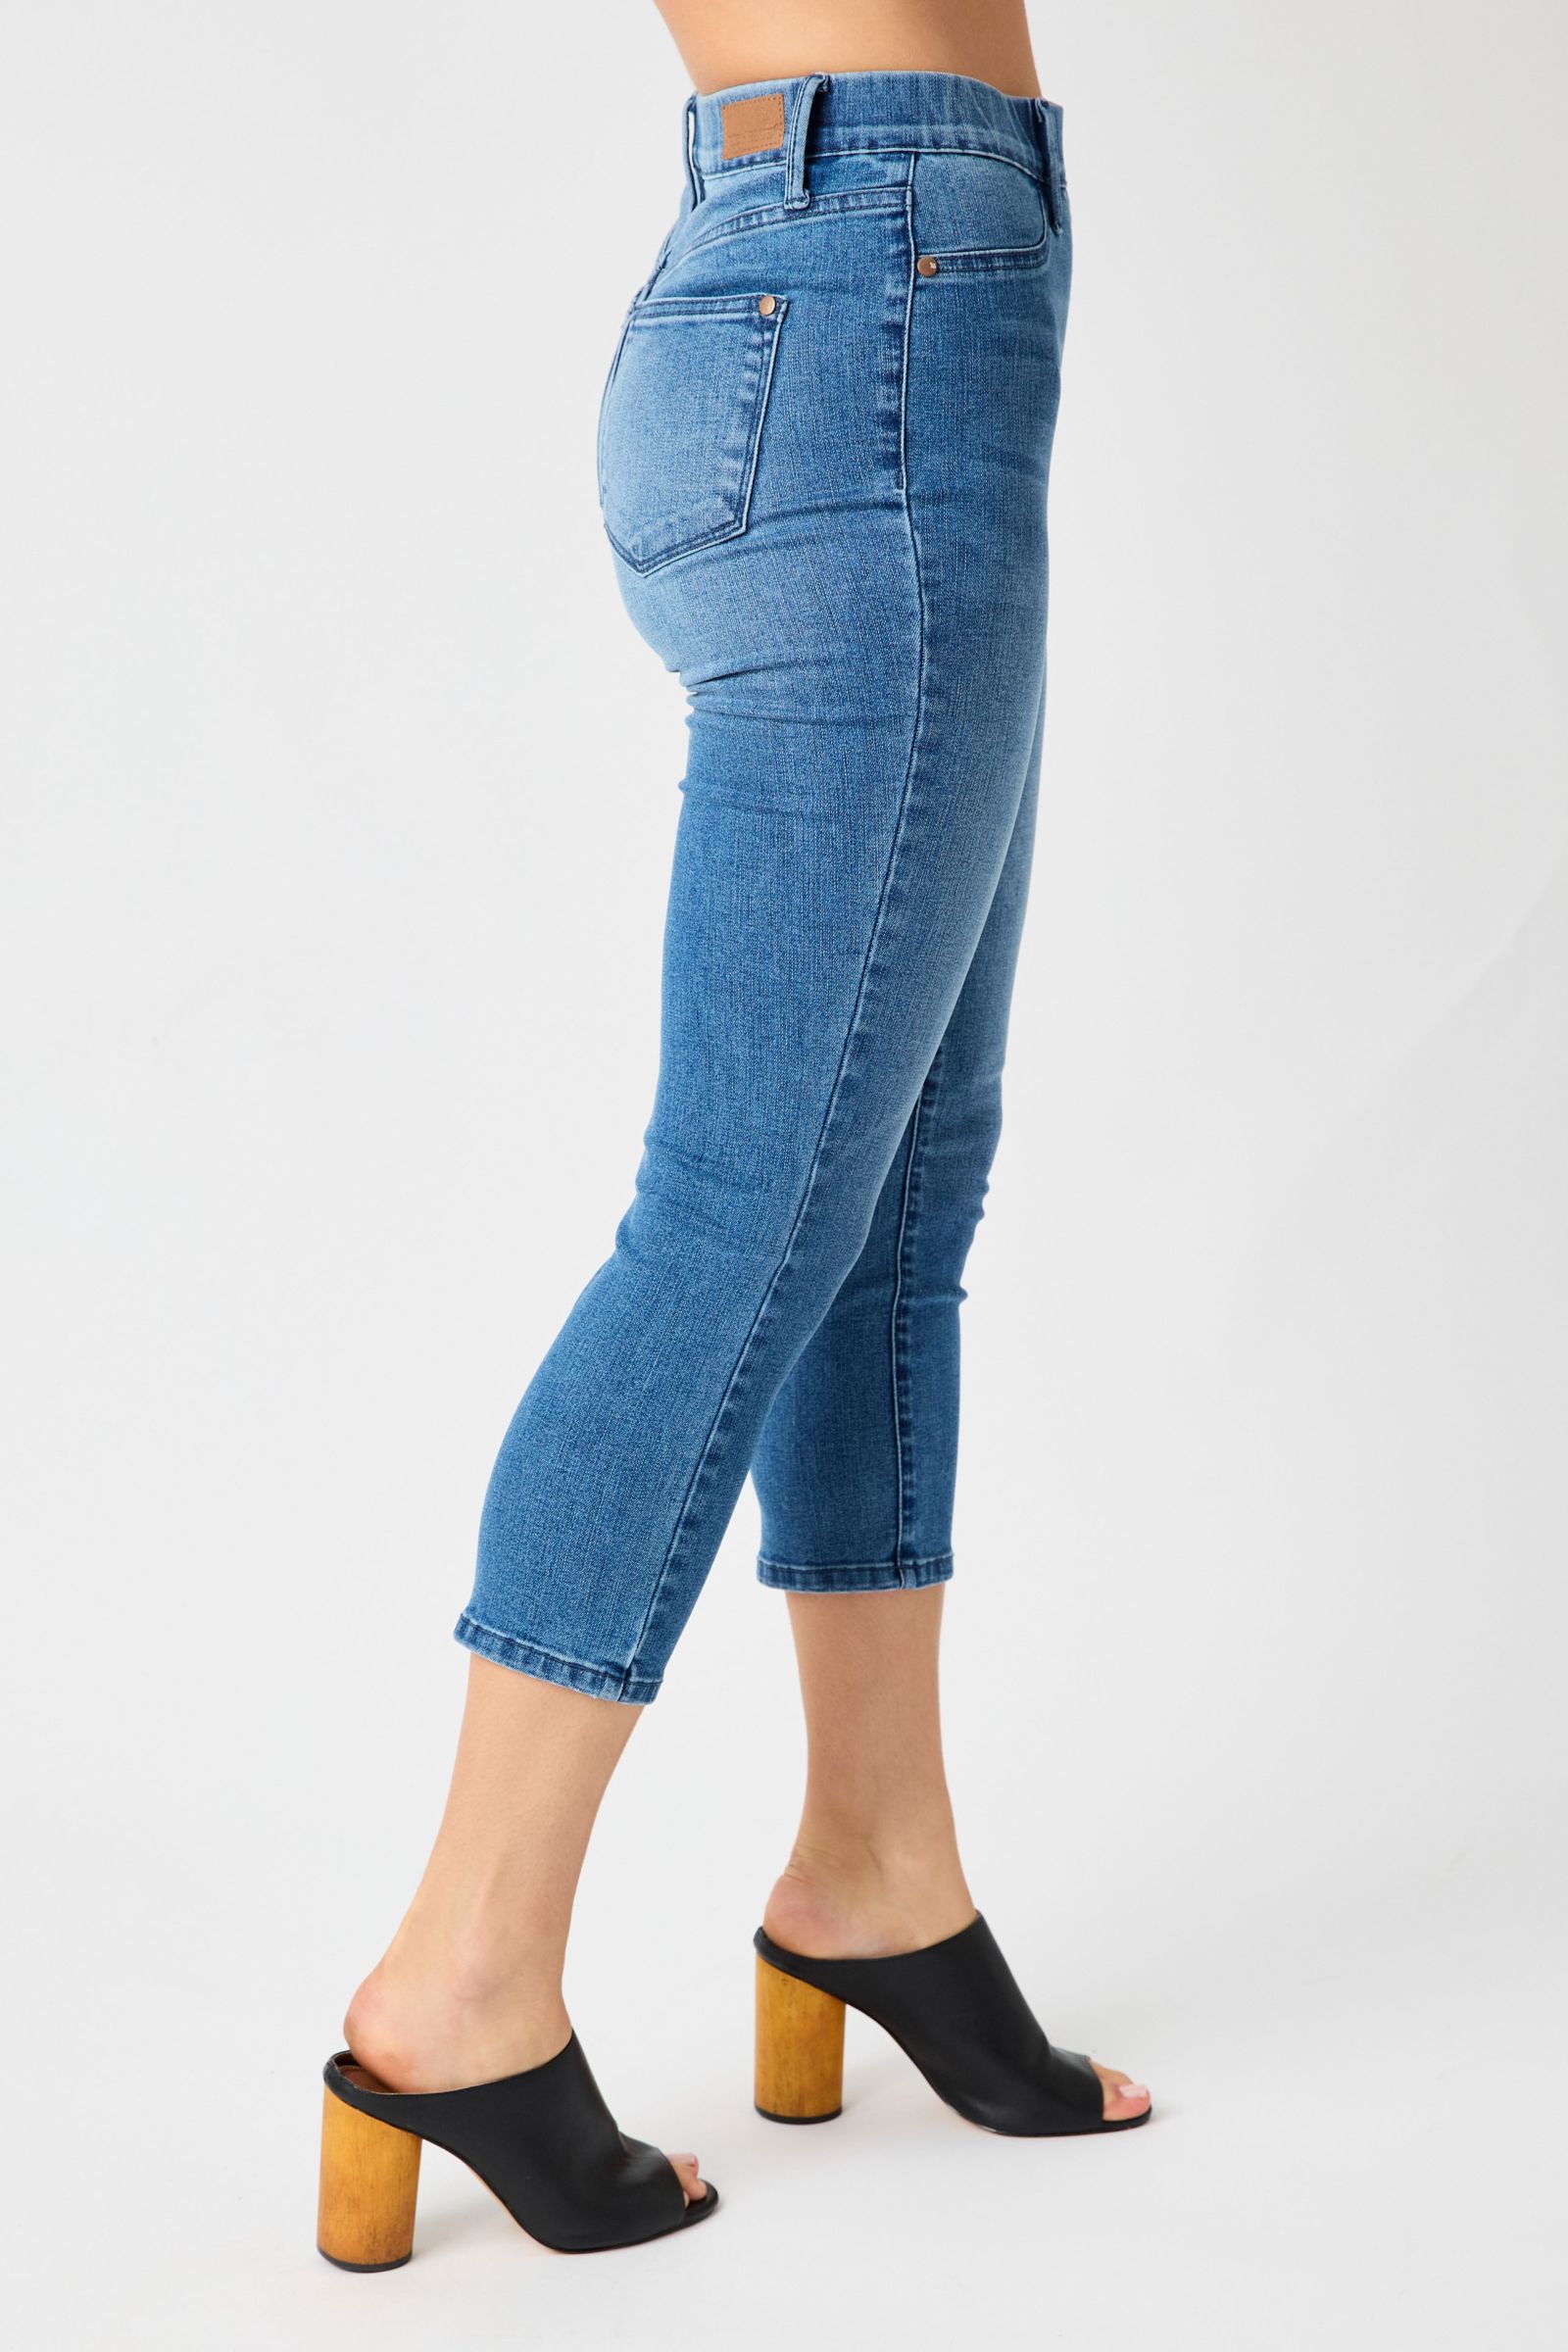 Pull on Capri Jeans-Apparel > Apparel & Accessories > Clothing > Pants-Quinn's Mercantile